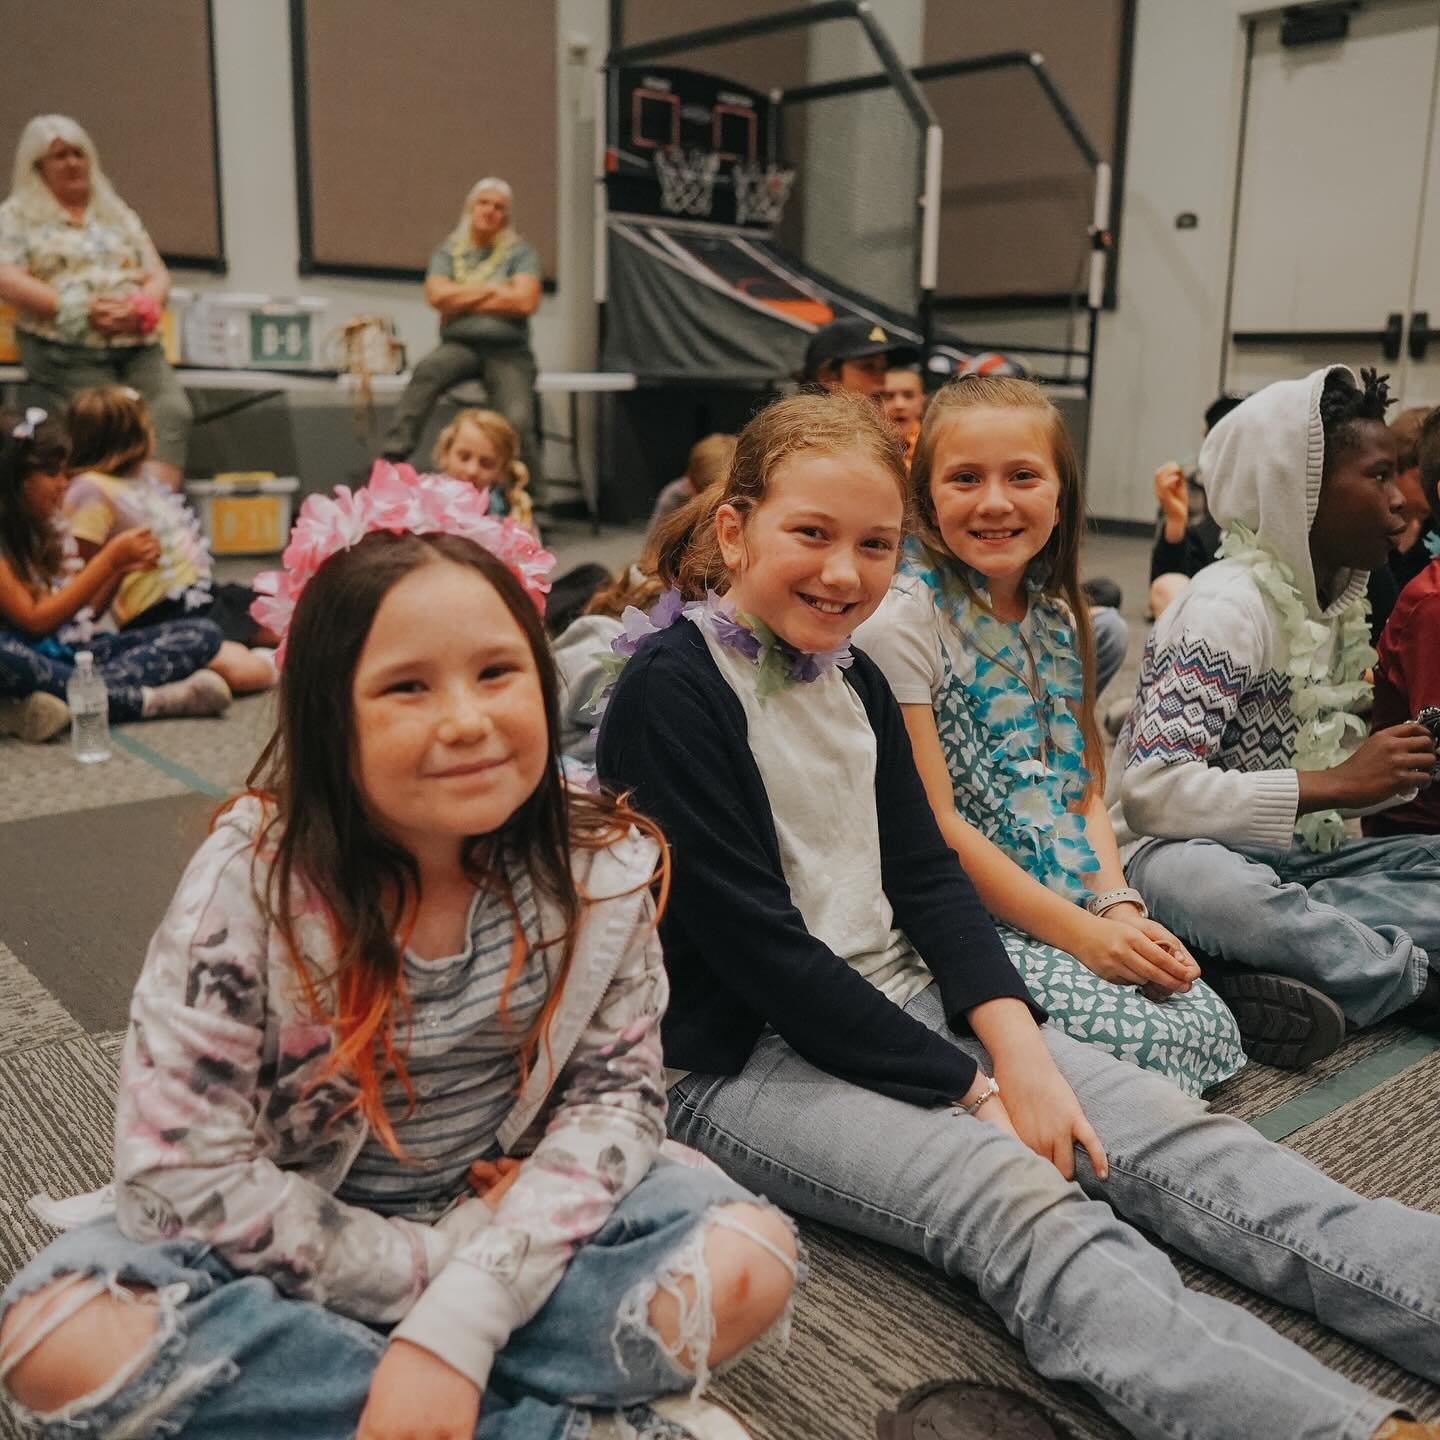 That&rsquo;s a wrap on another amazing season of Wednesday night family night!! We had a blast ending the year with minute to win it games, magic tricks, and a luau night!